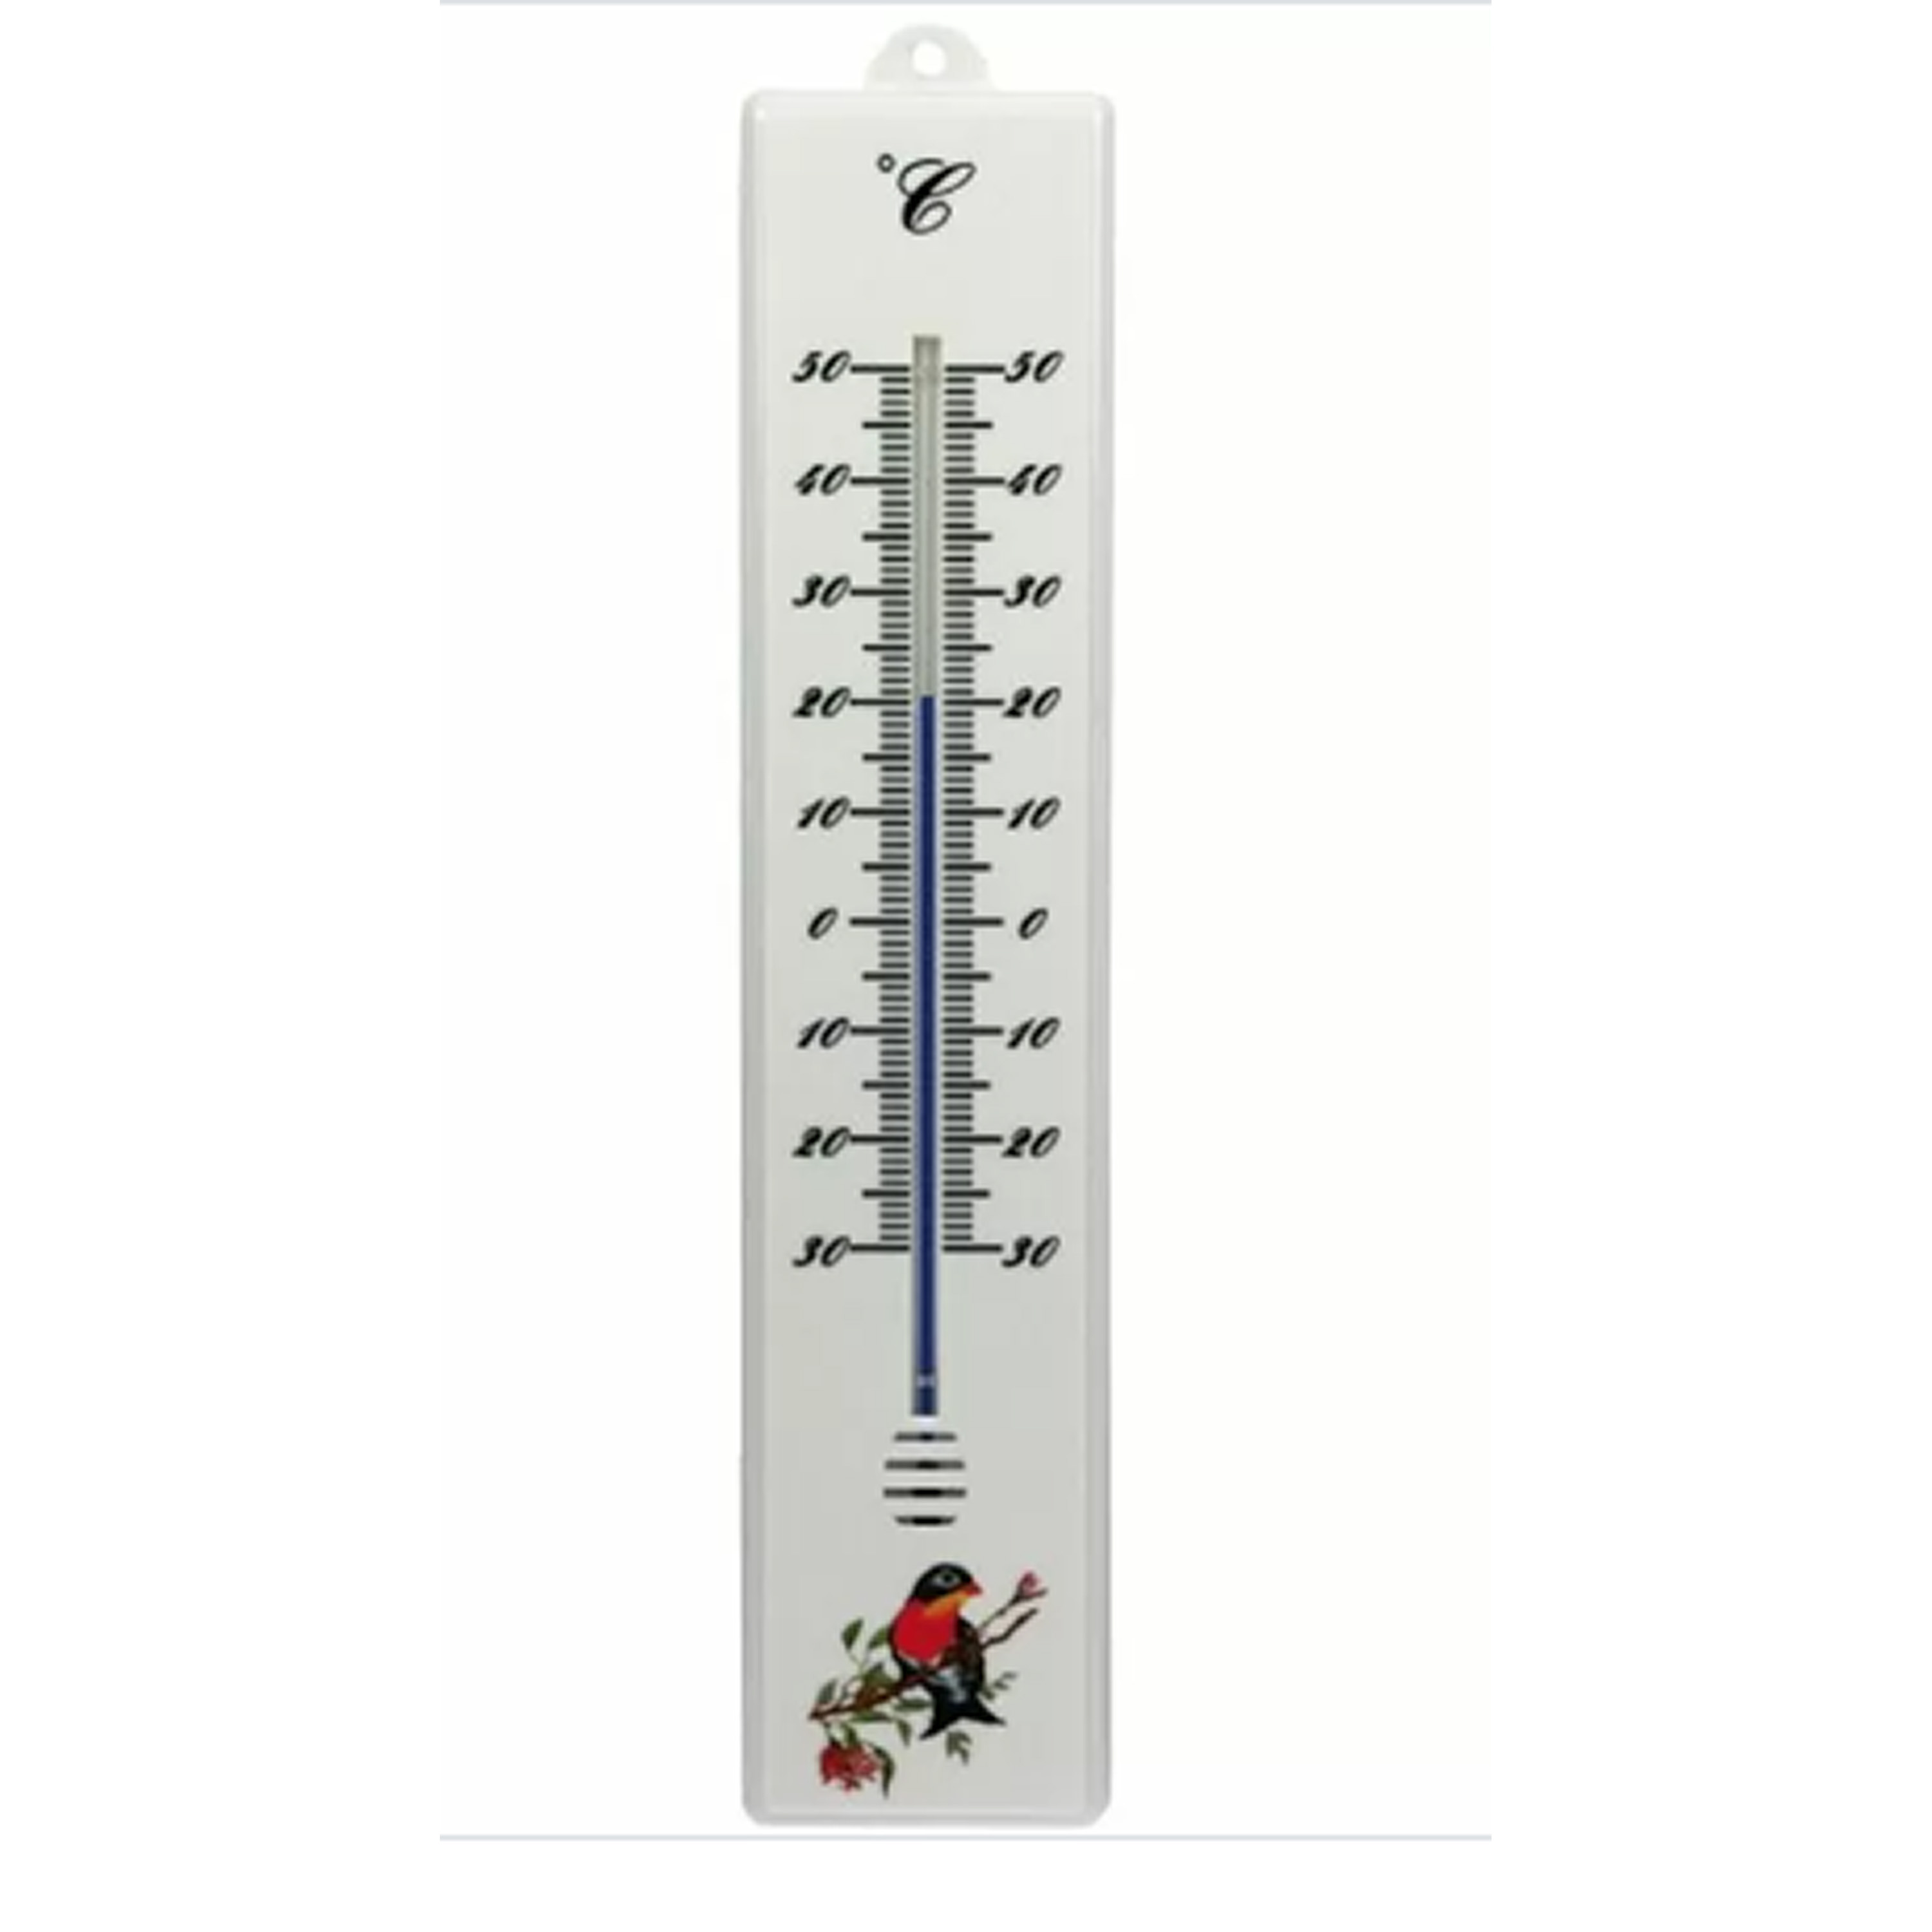 Thermometer buiten wit 32 cm